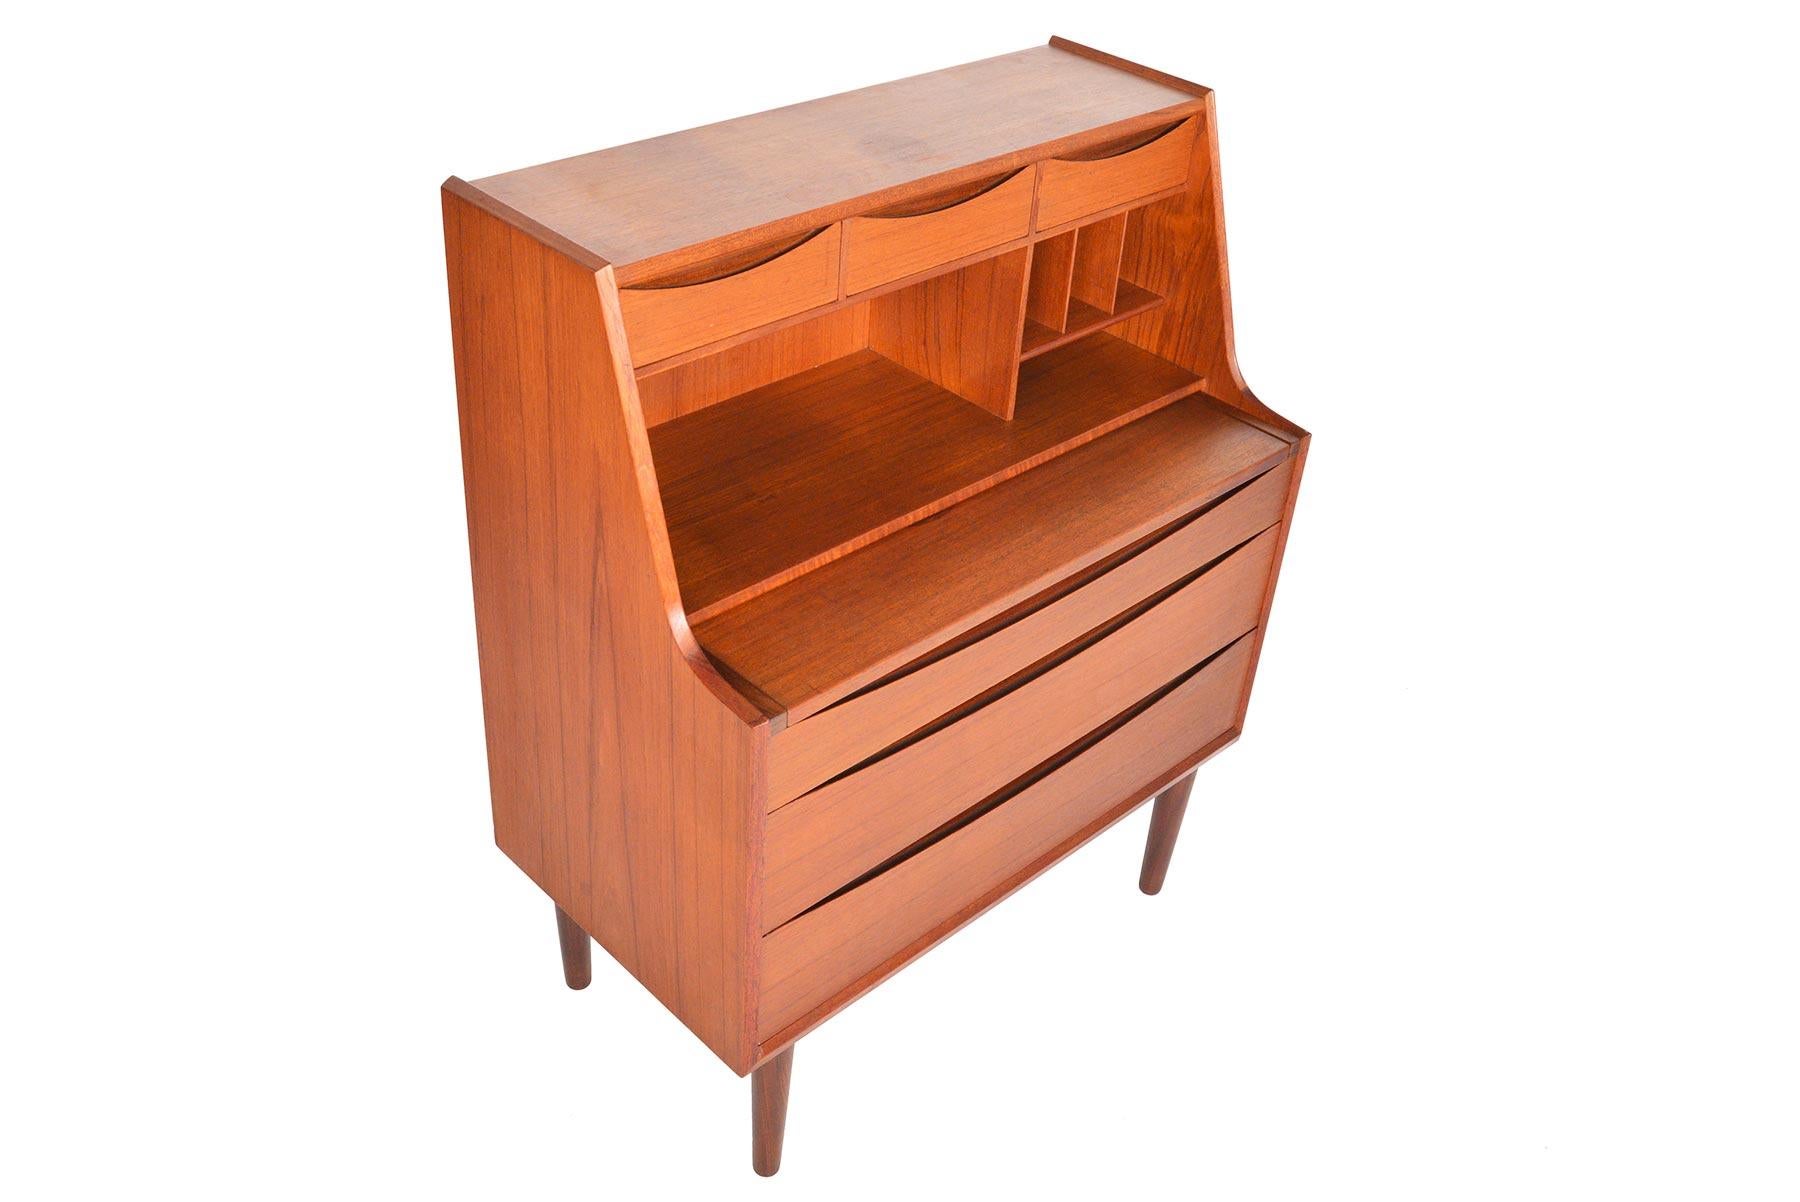 Designed by Arne Vodder in the 1960s, this Danish modern teak secretary is bursting with functionality! A secretary top is outfitted with three small drawers and divided storage. Top drawer pulls out to create a desk and when the top plate is